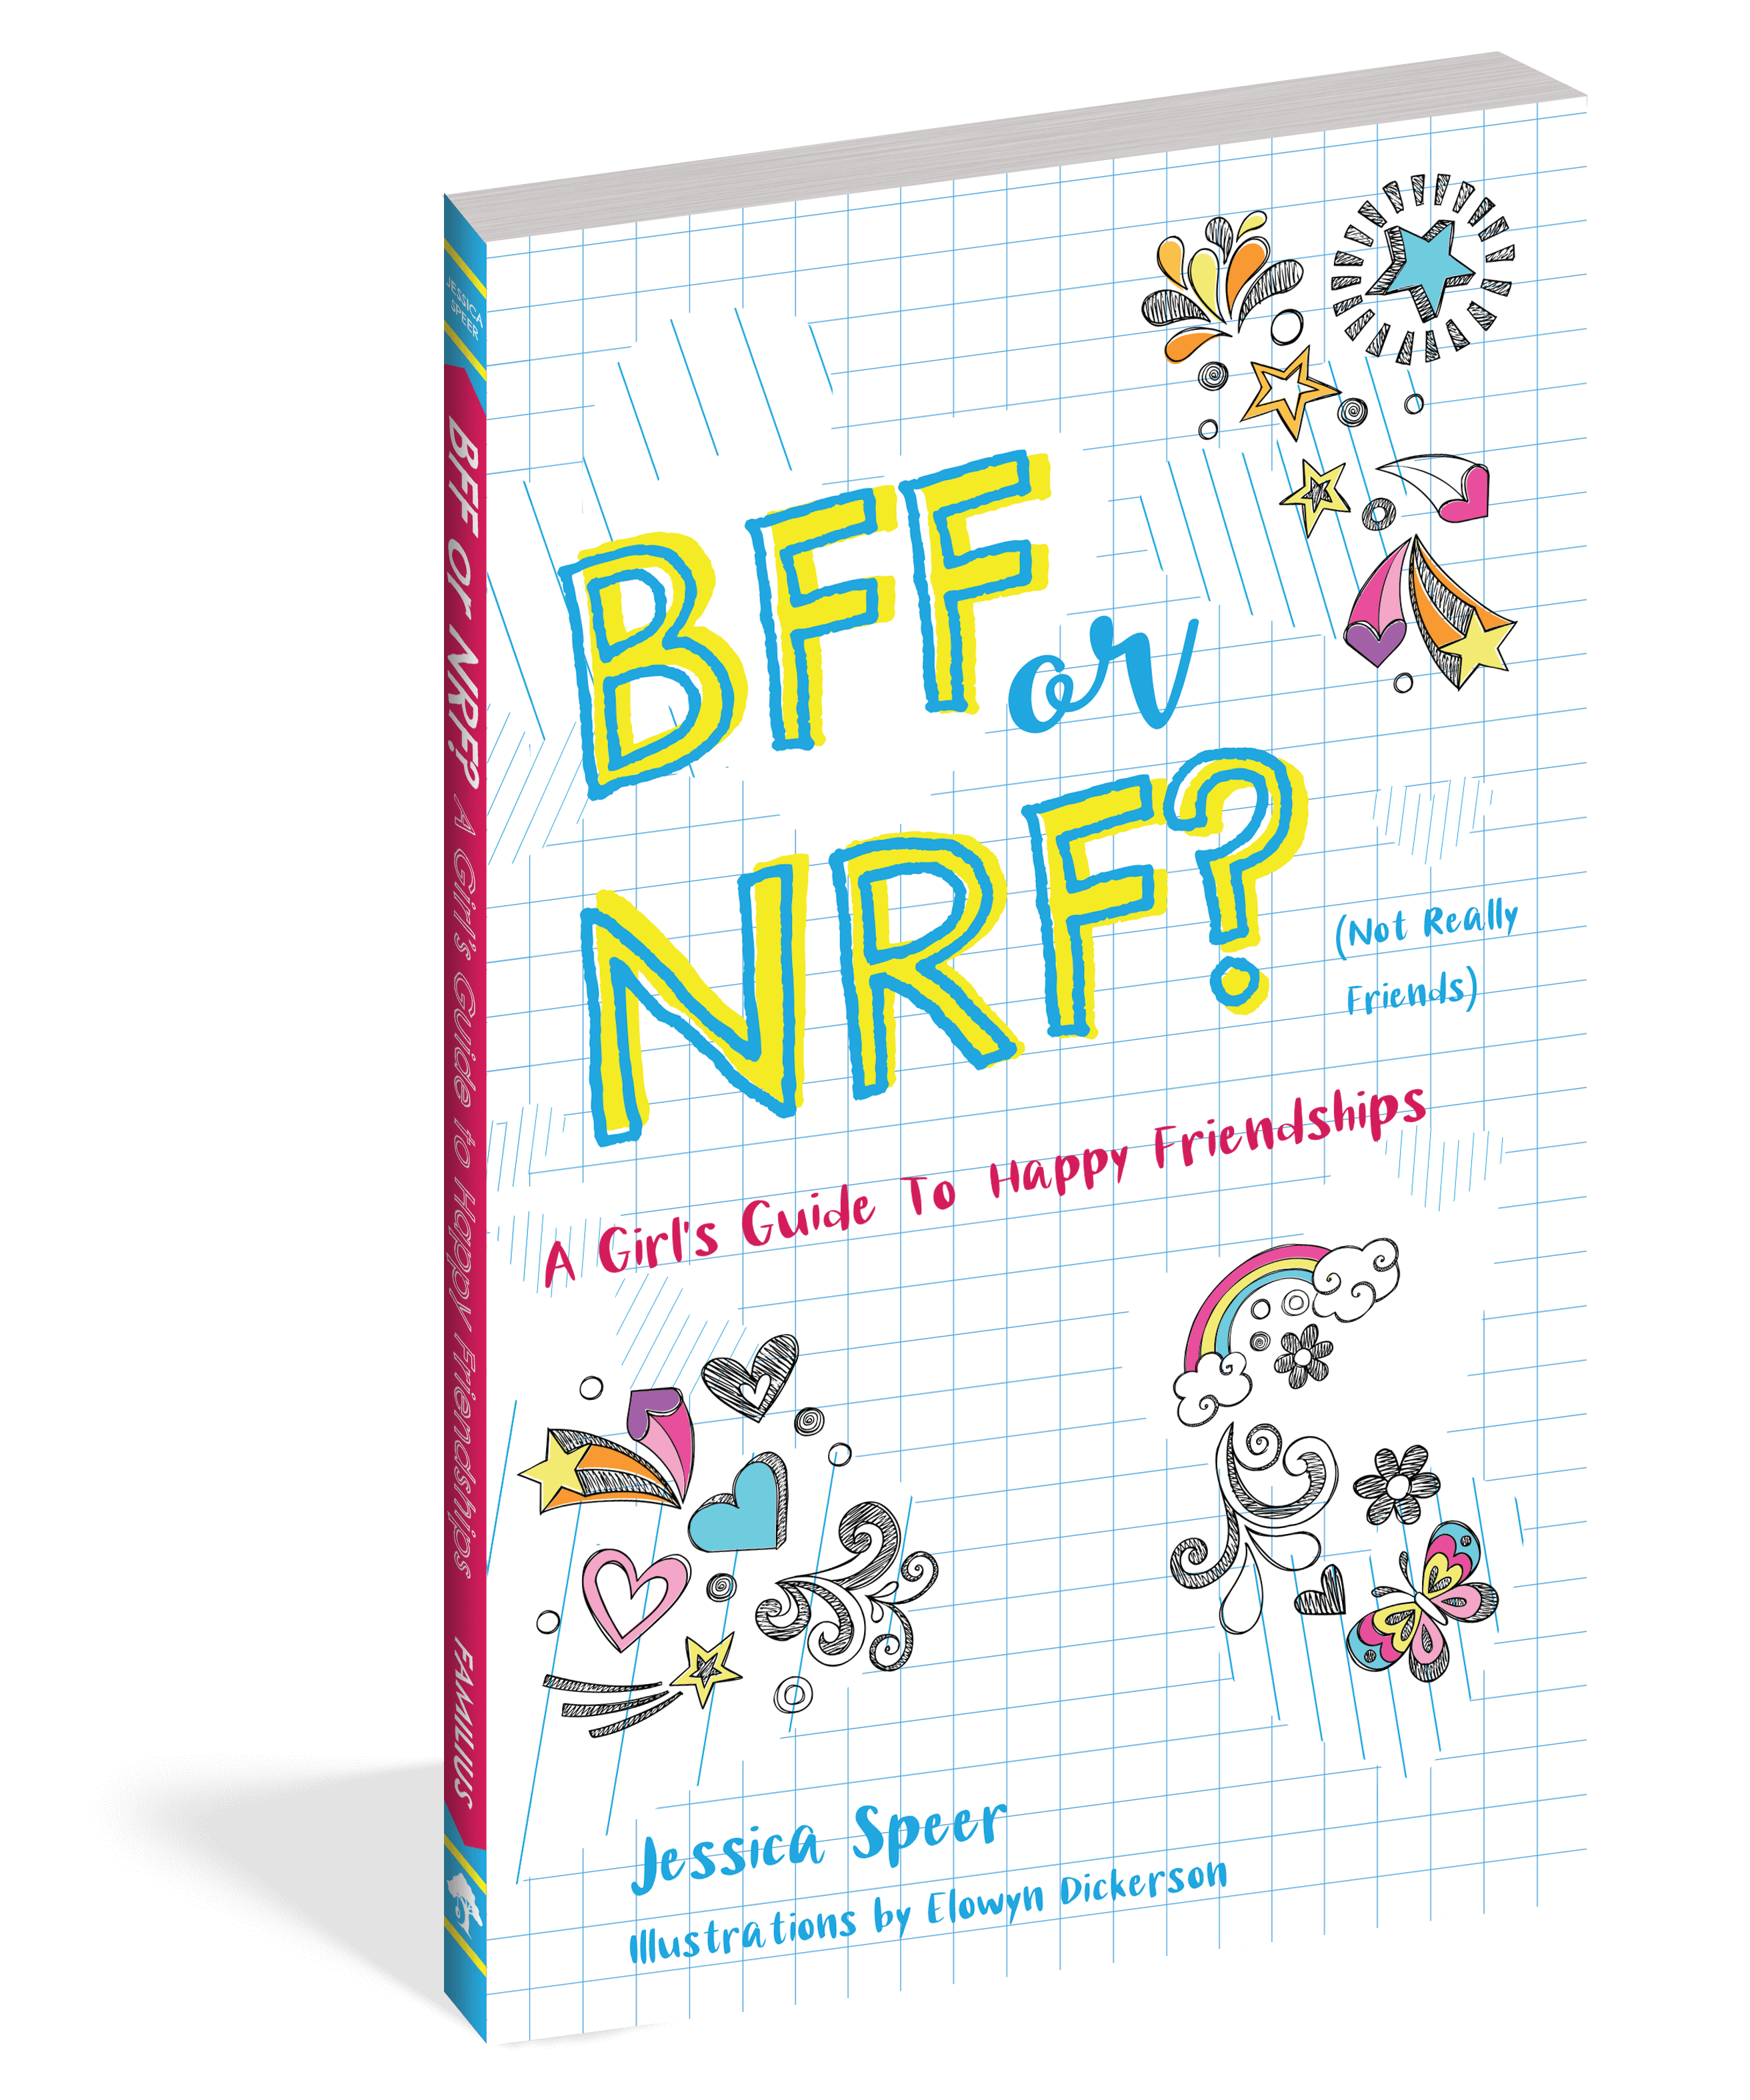 The cover of the book BFF or NRF (Not Really Friends).